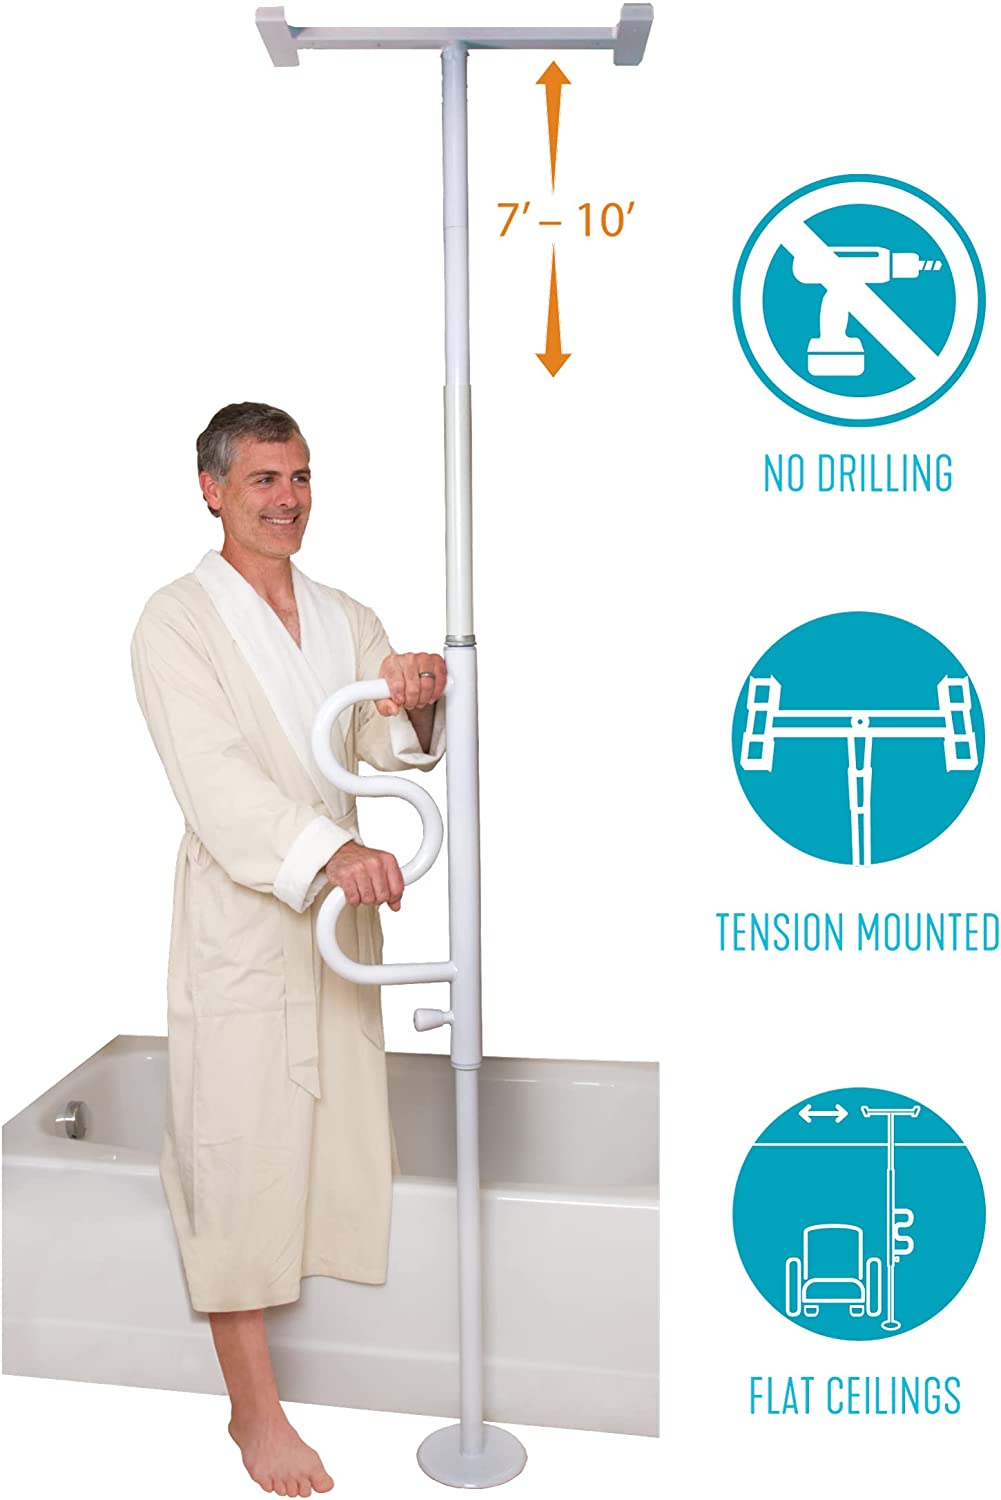 Stander Security Pole and Curve Grab Bar, Elderly Tension Mounted Floor to Ceiling Transfer Pole - Midwest DME Supply